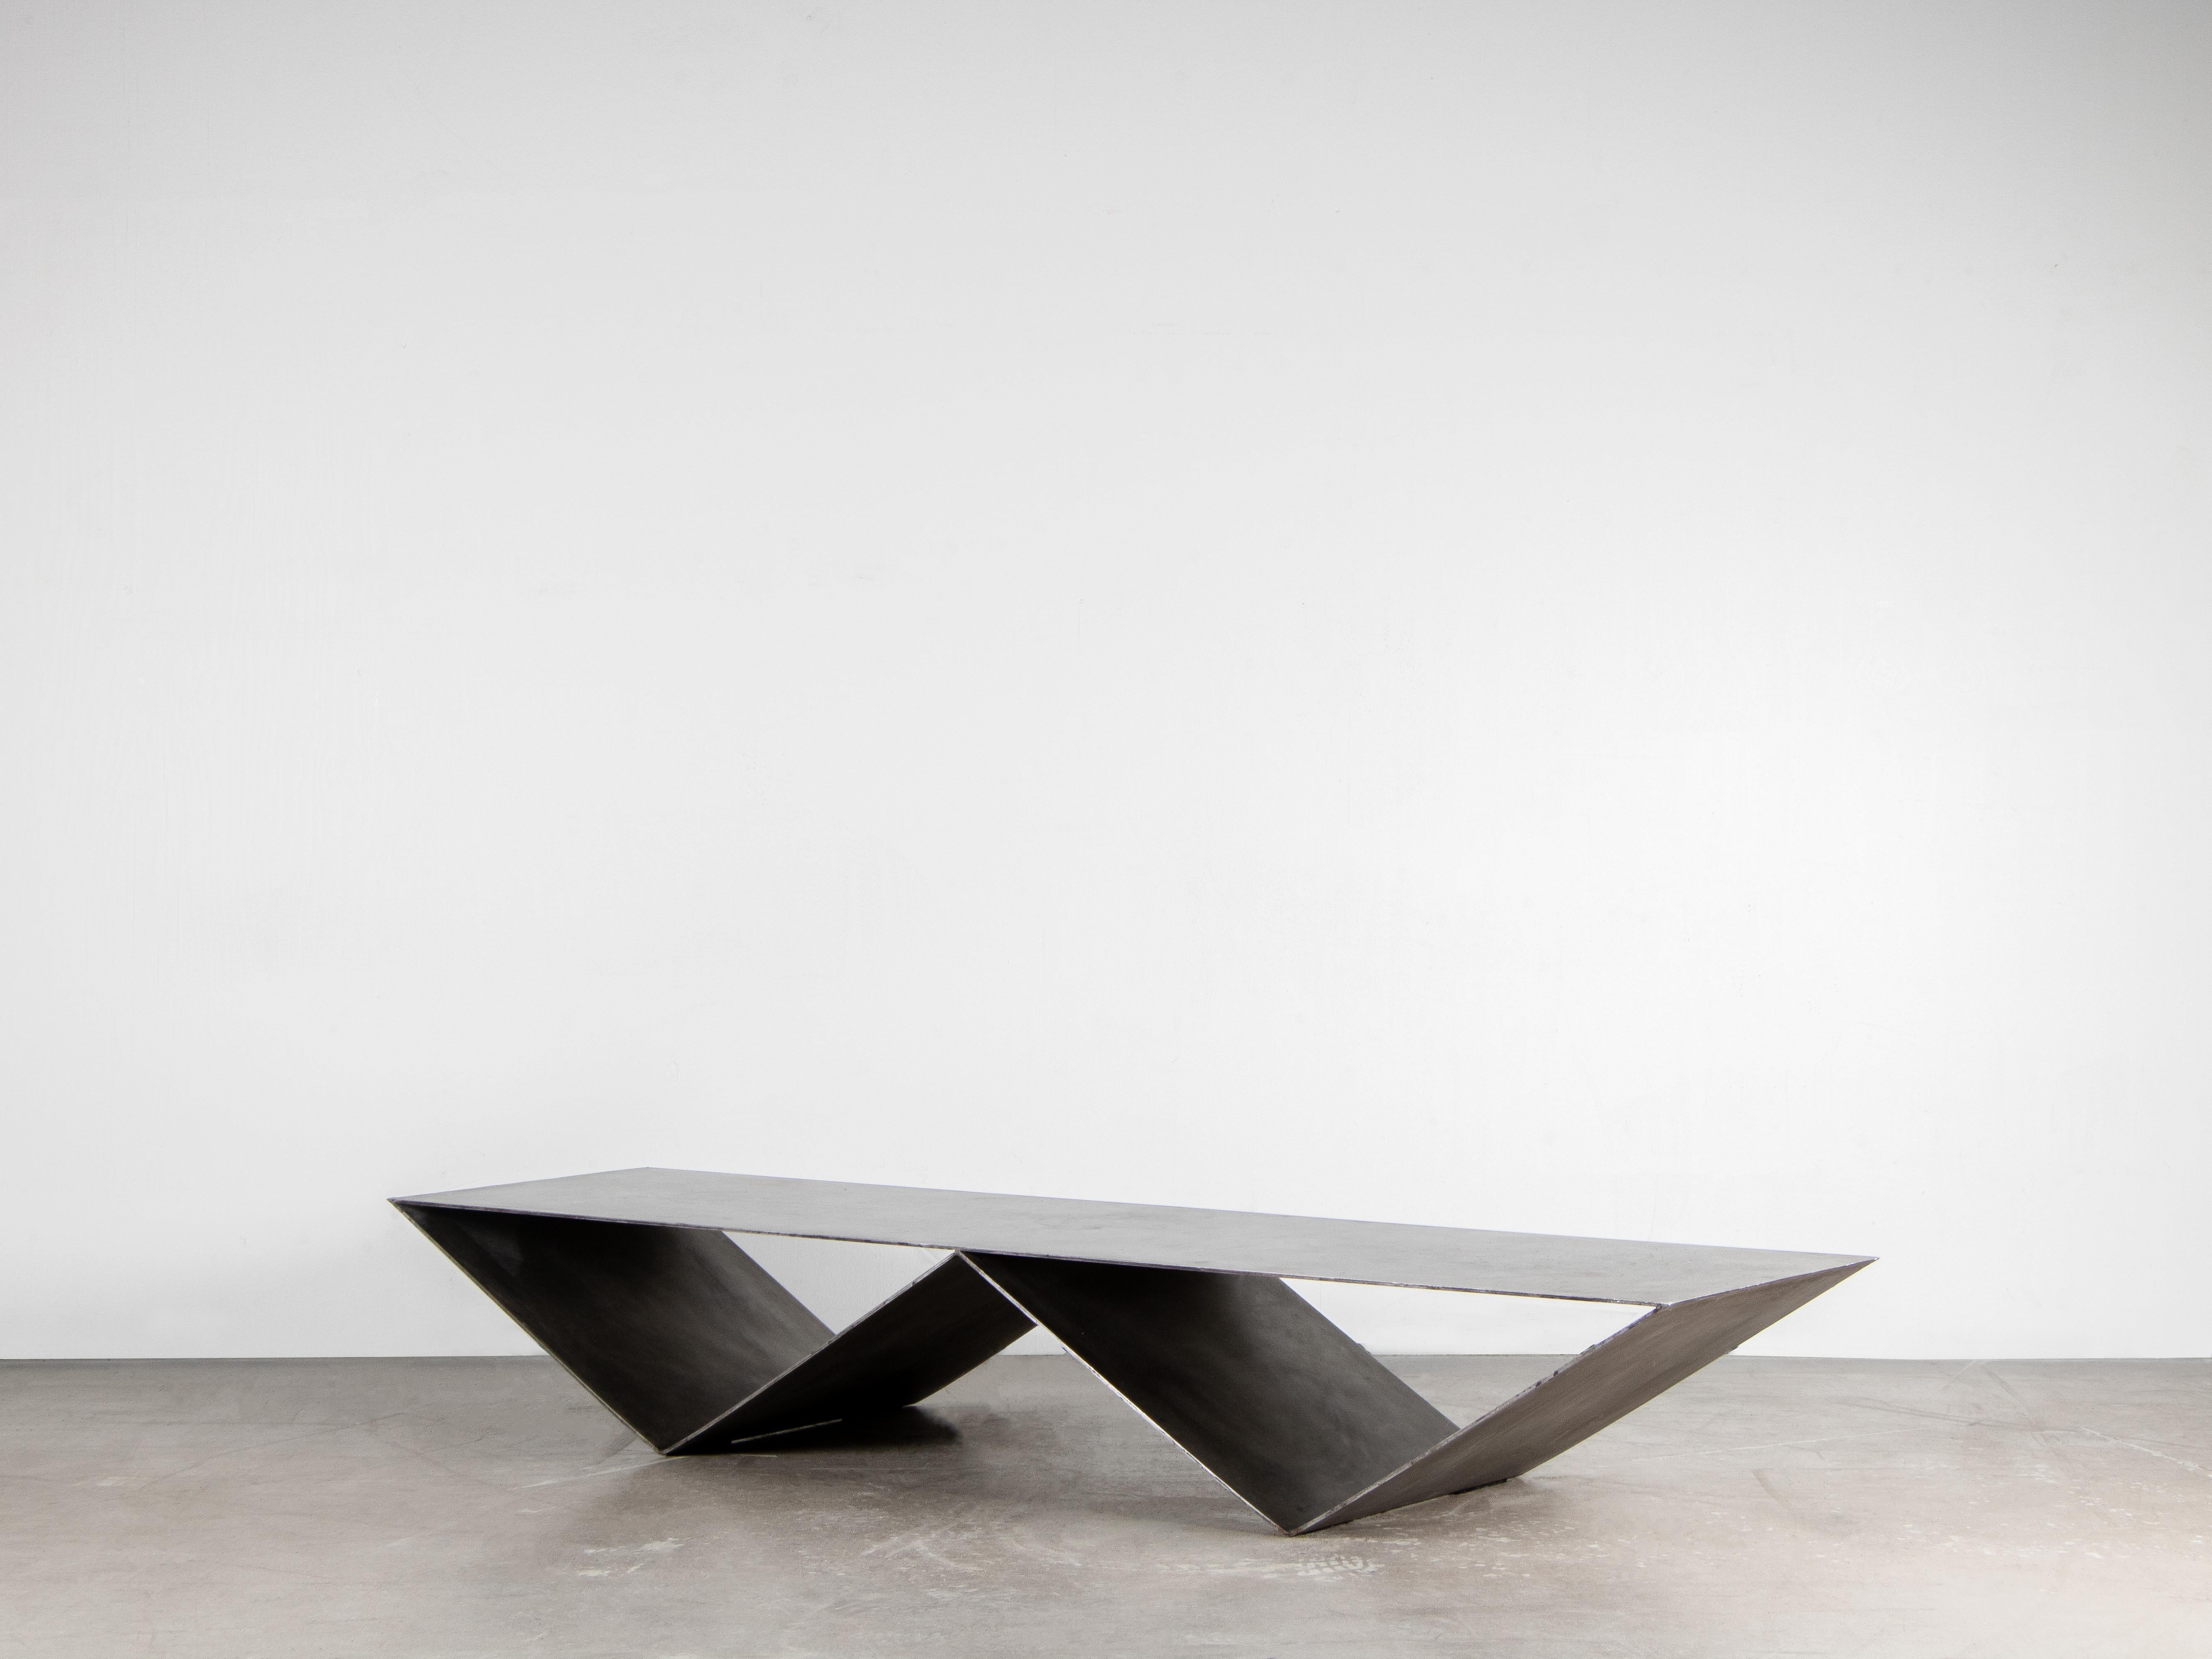 Contemporary Coffee / Sofa Table in Aluminium - Udd Table by Lucas Morten

2019
Limited edition of 27 + 1 AP
Dimensions (cm): L 170 W 45 H 27
Material: Anodized aluminium

During a visit to the Jewish Museum in New York, Lucas Morten got